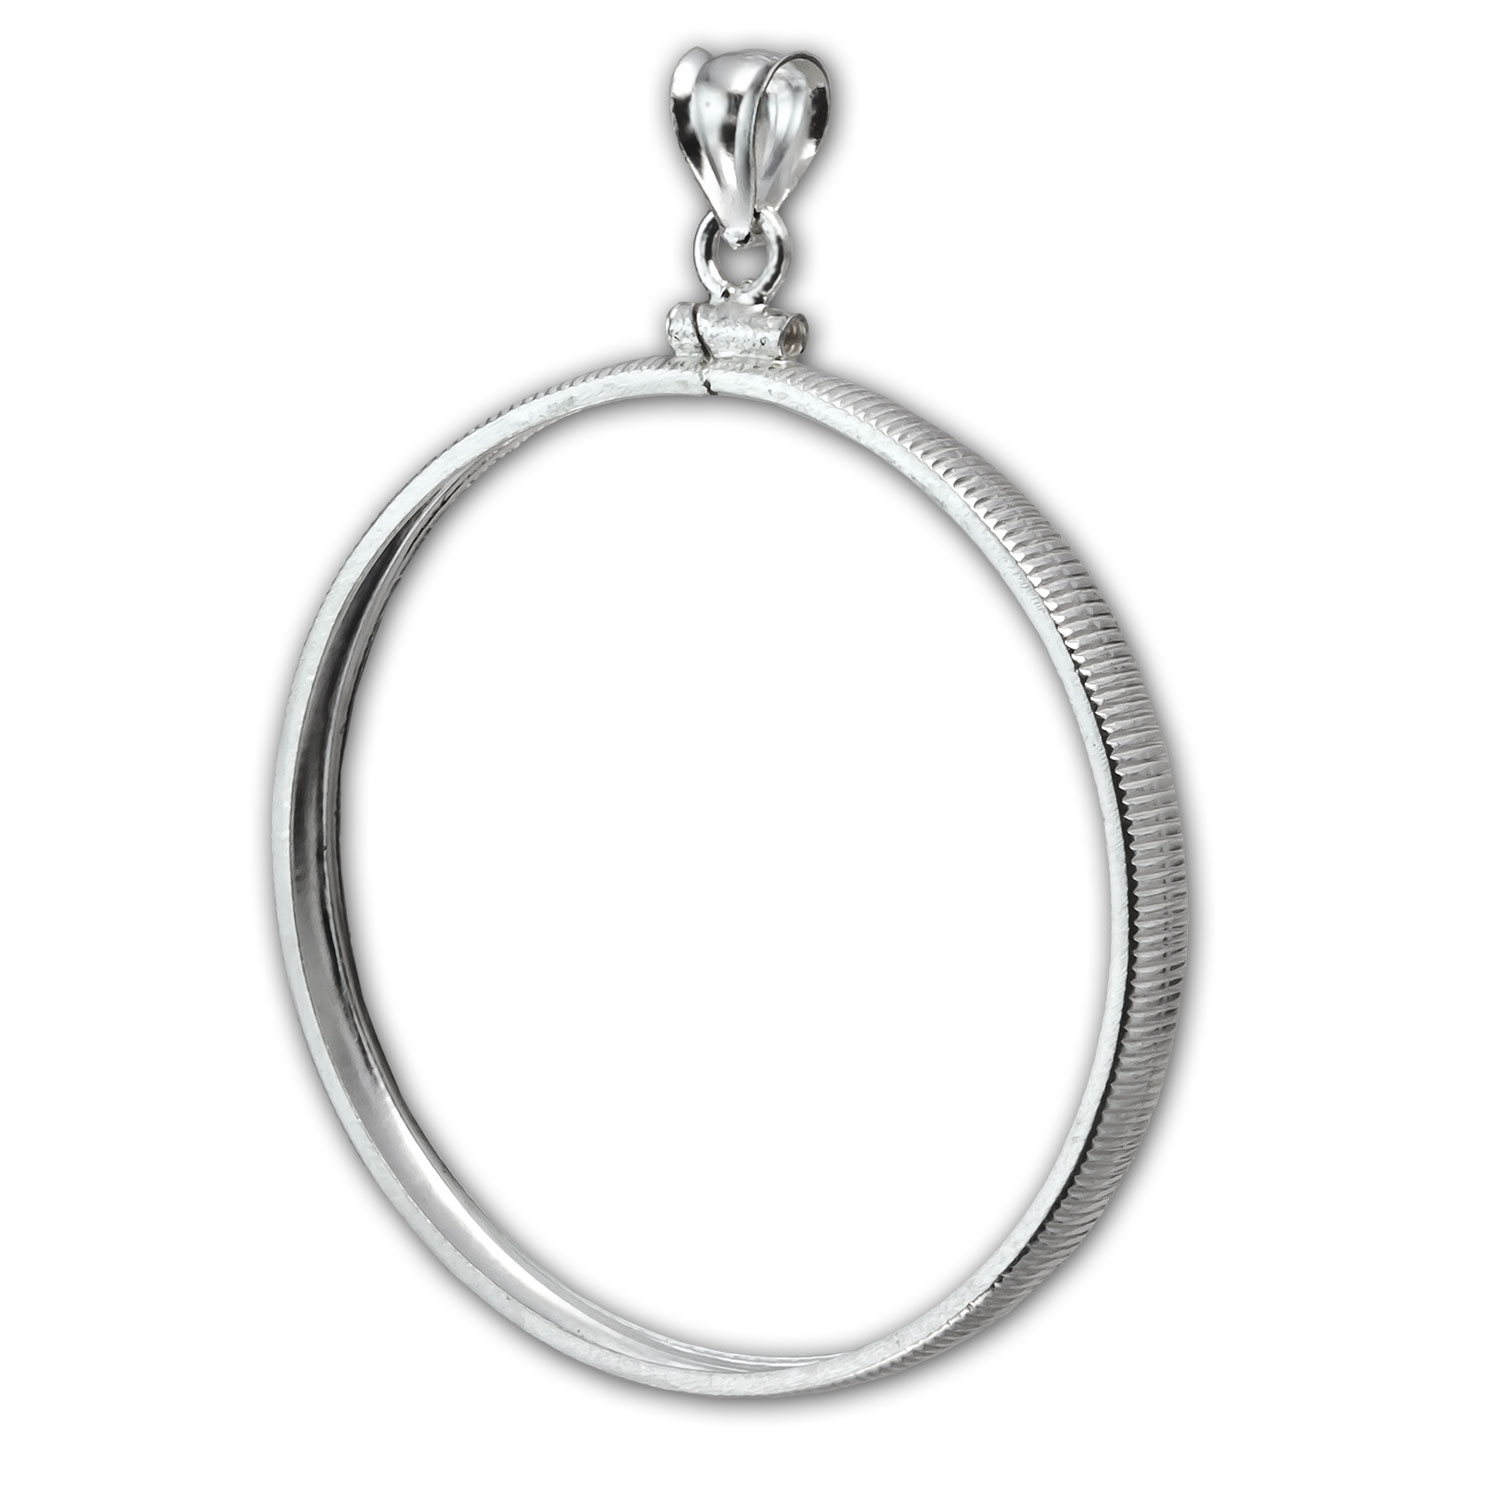 Buy Sterling Silver Screw Top Plain Front Coin Bezel - 40.6 mm